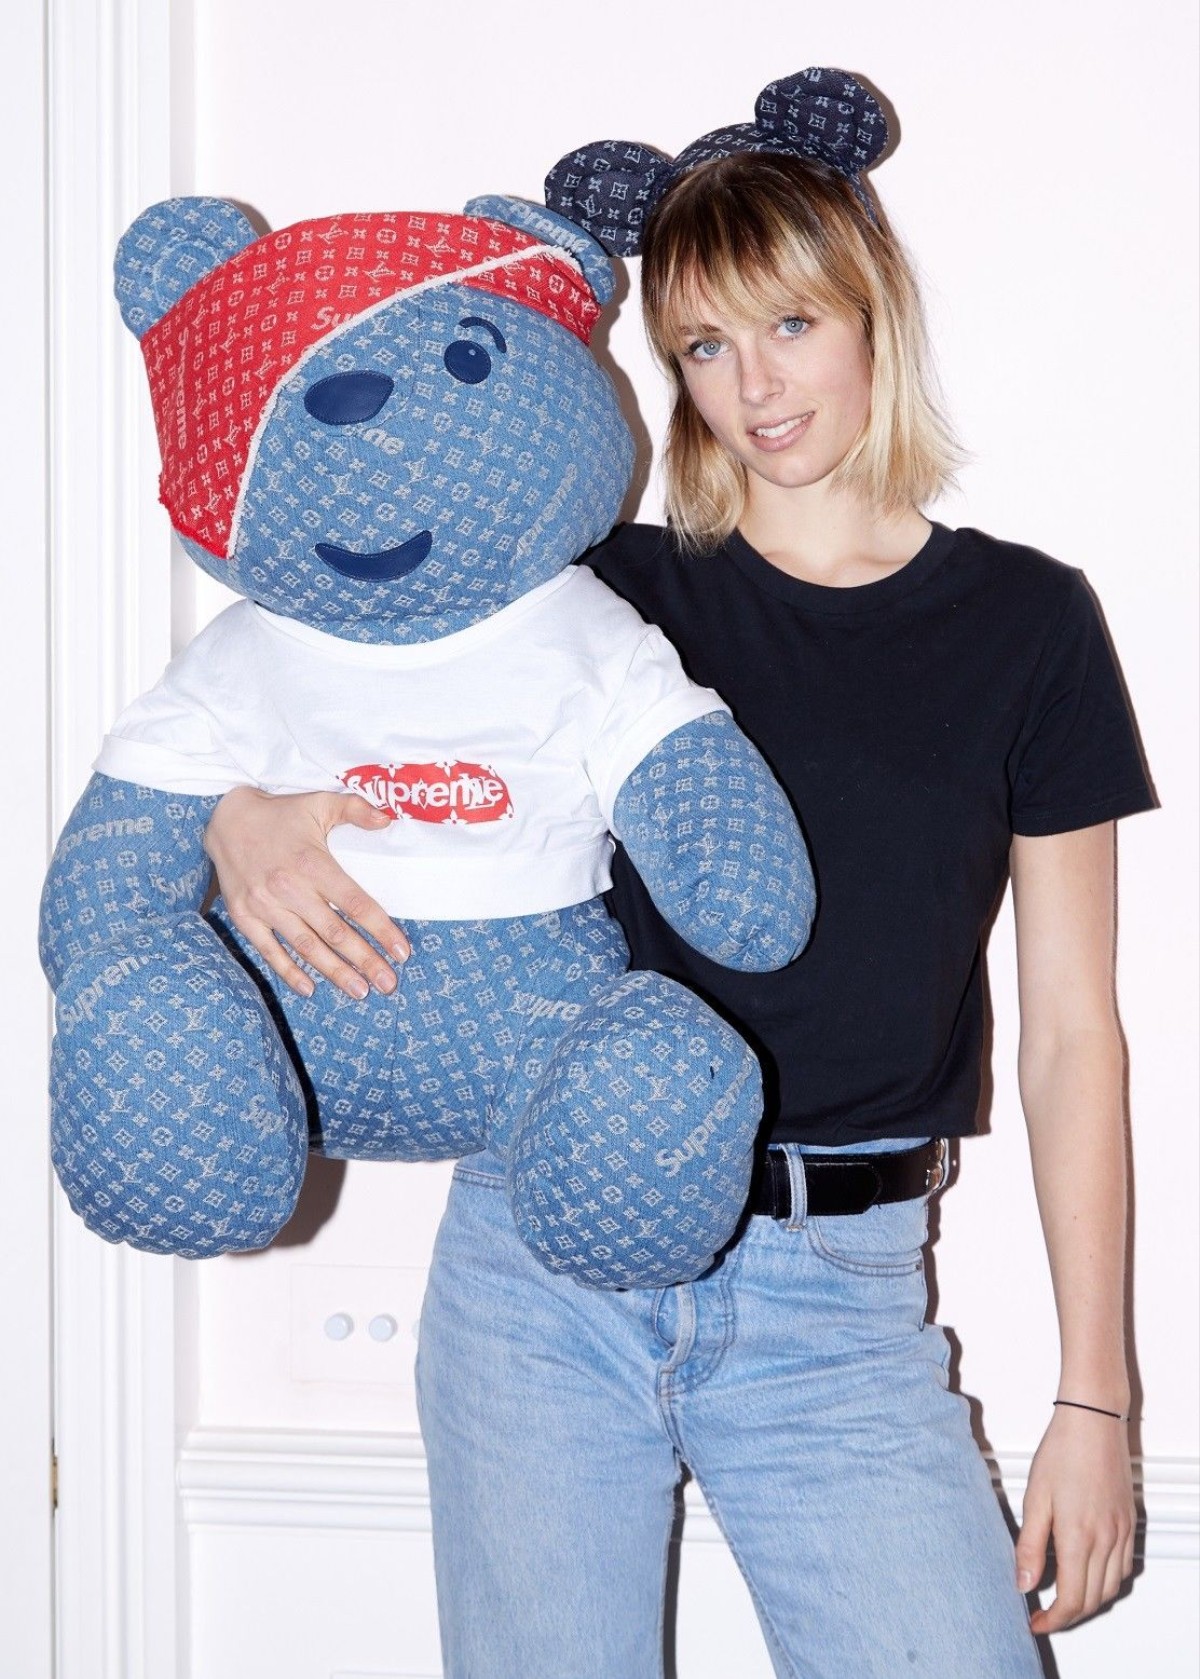 A Supreme X LV Pudsey Bear Just Sold For £80,000 - Trapped Magazine